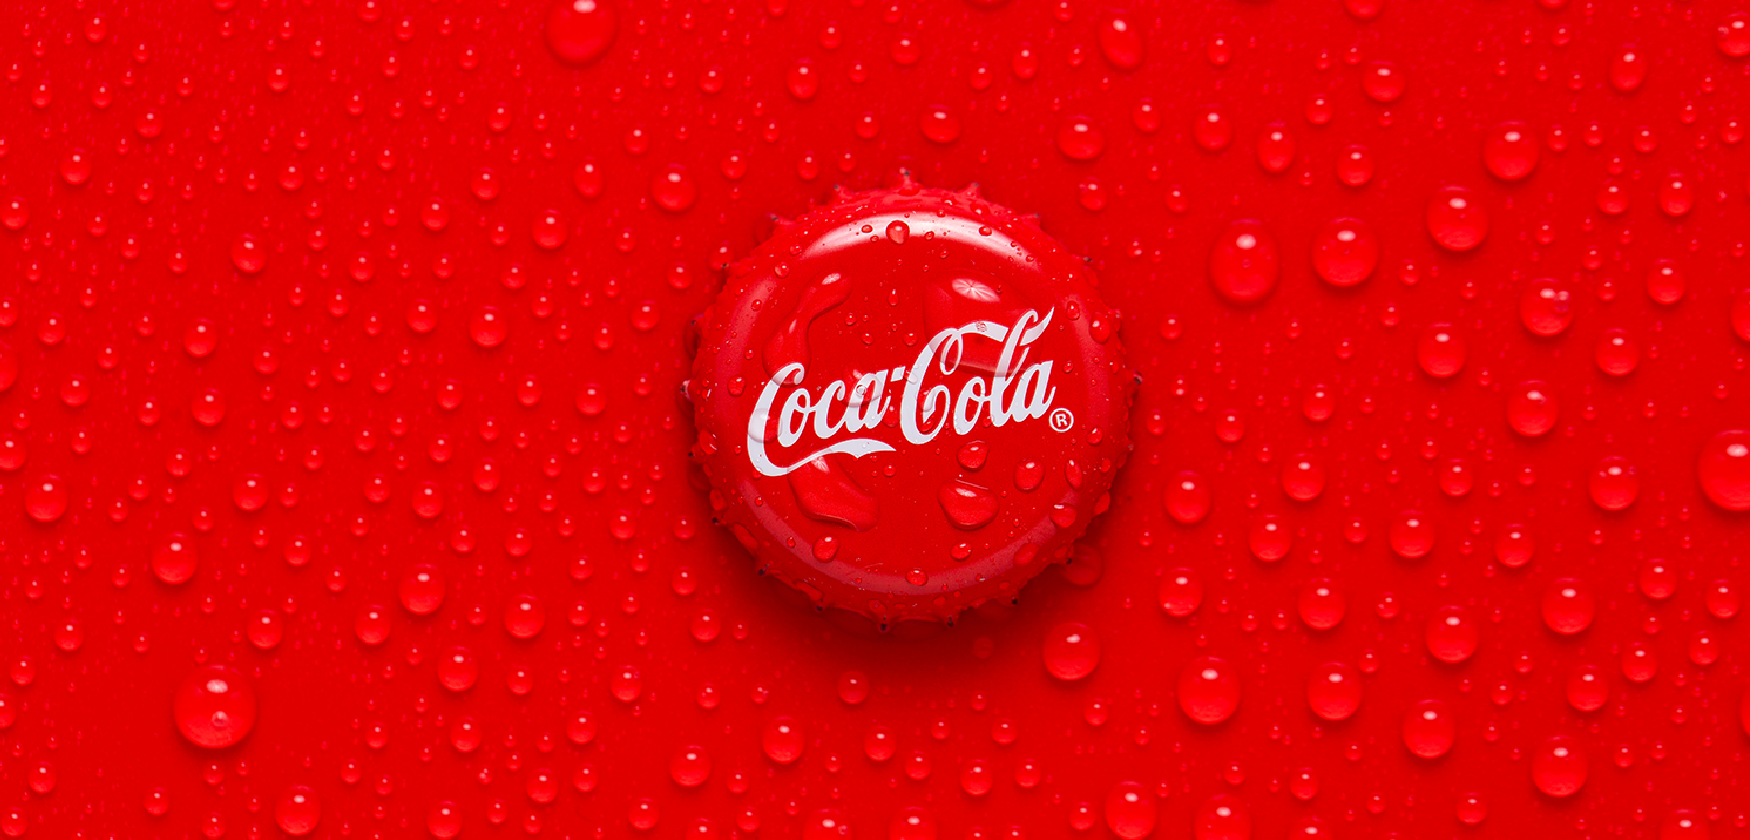 coca-cola bottle top on a red background